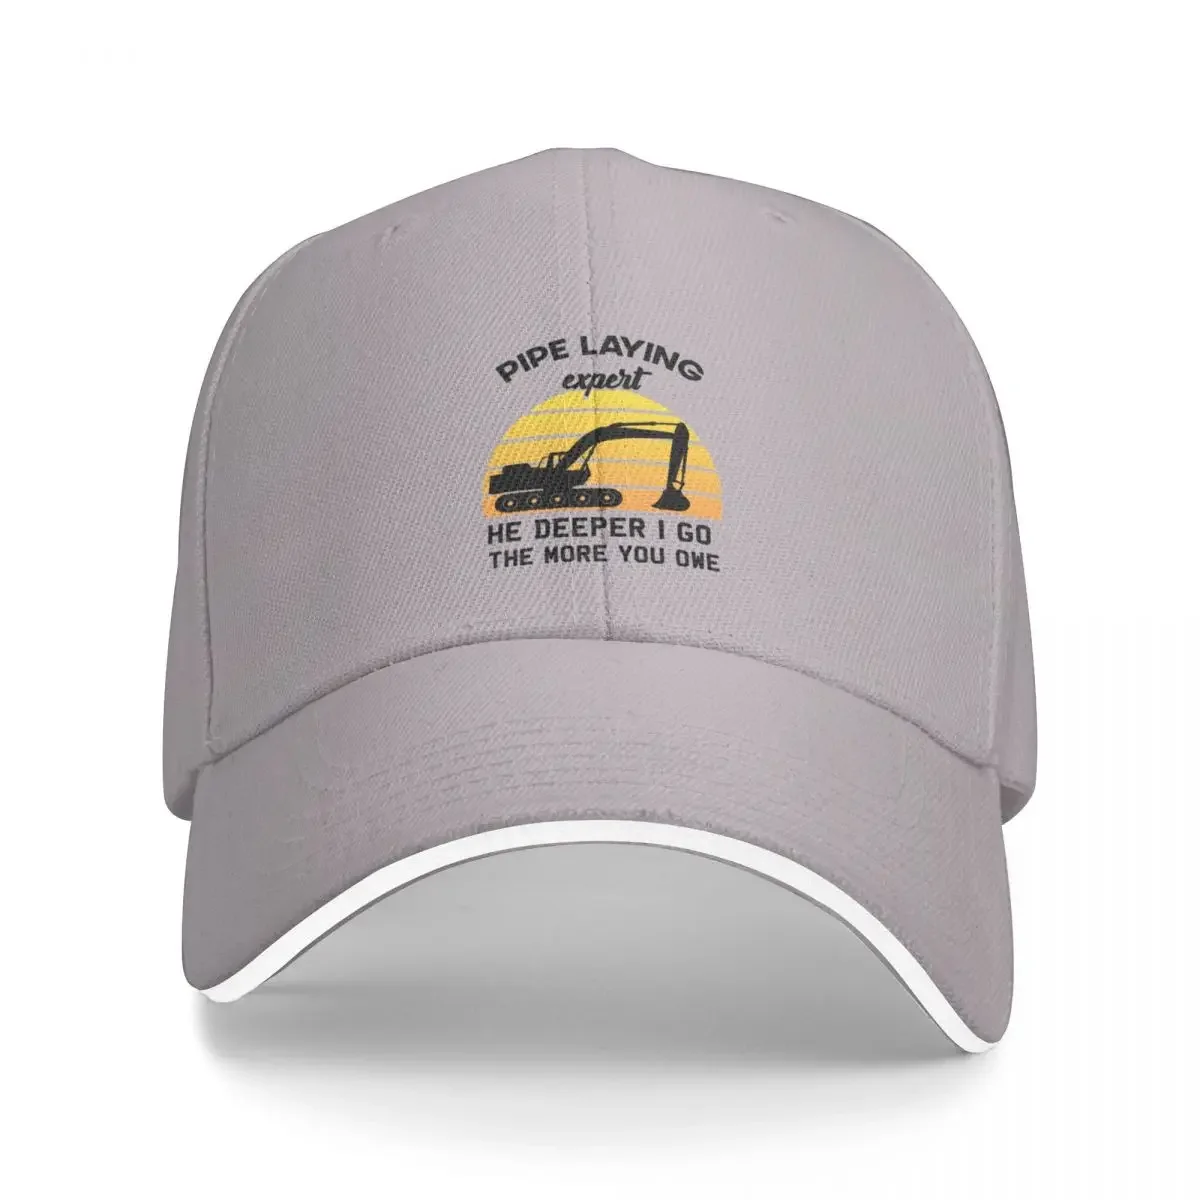 

The Deeper I Go the More You Owe - Pipe Laying Expert Gift Cap Baseball Cap trucker hat hat man luxury boy child hat Women's